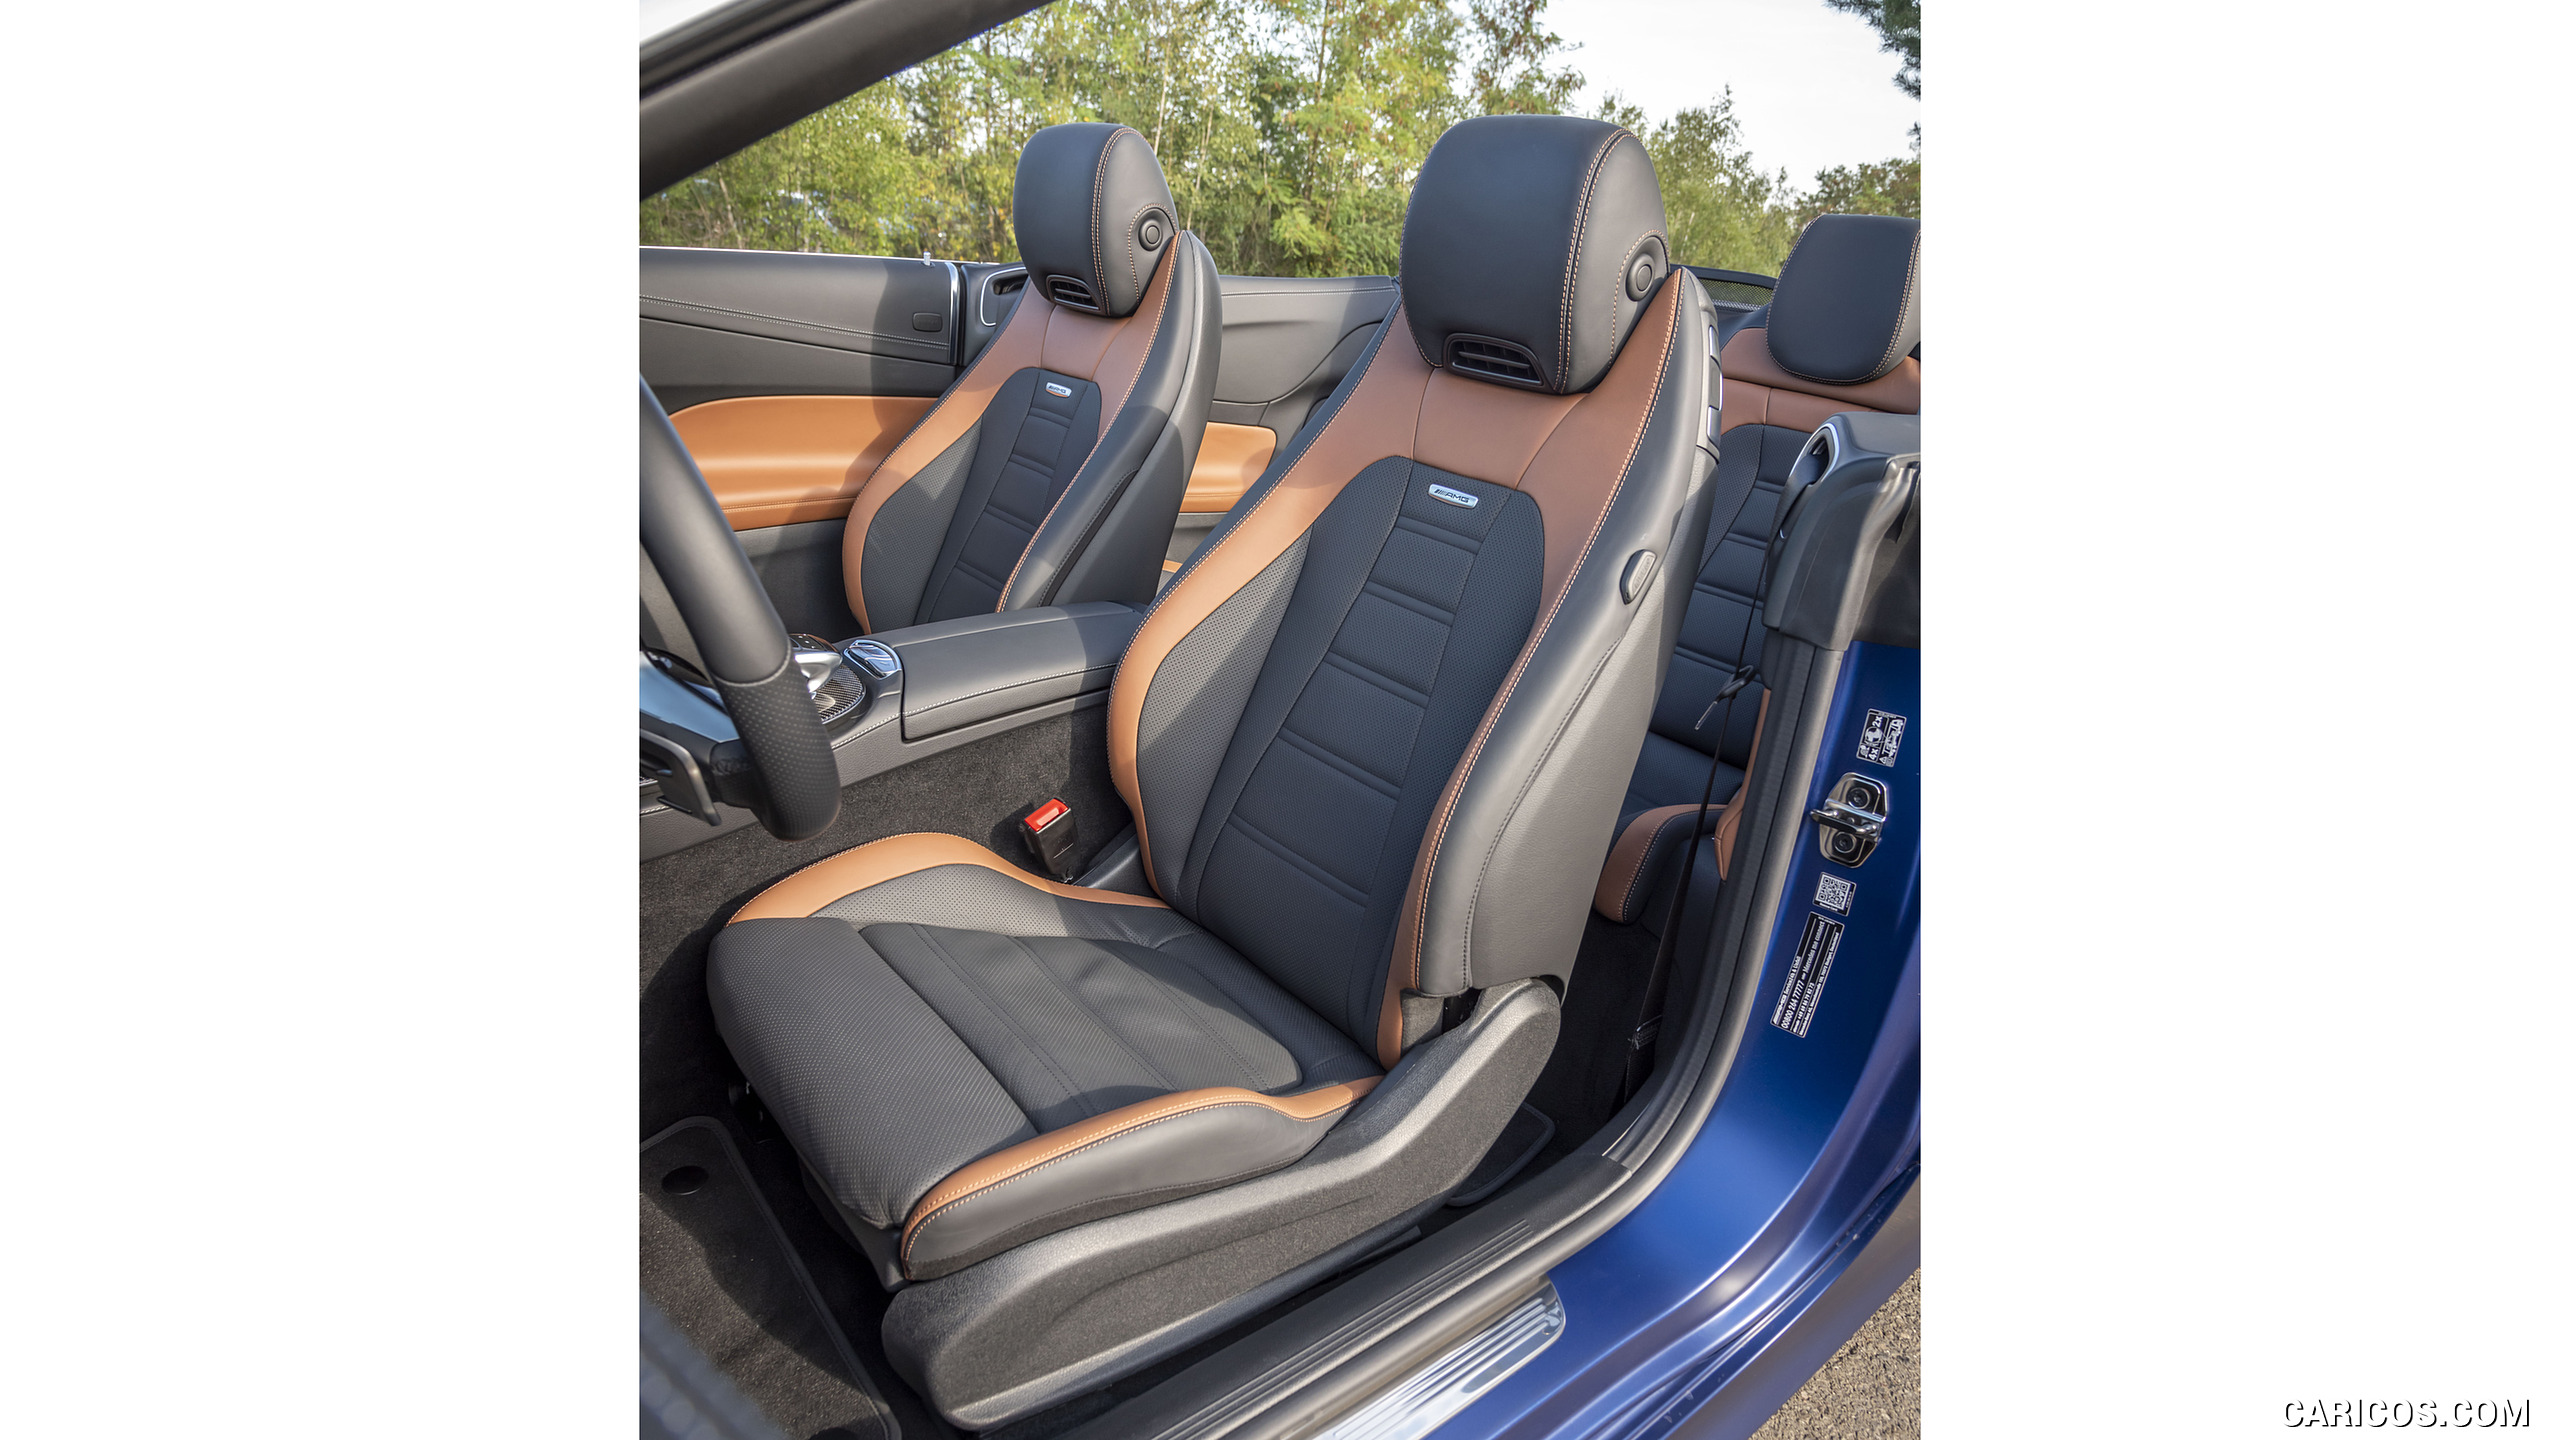 2021 Mercedes-AMG E 53 4MATIC+ Cabriolet - Interior, Front Seats, #93 of 166